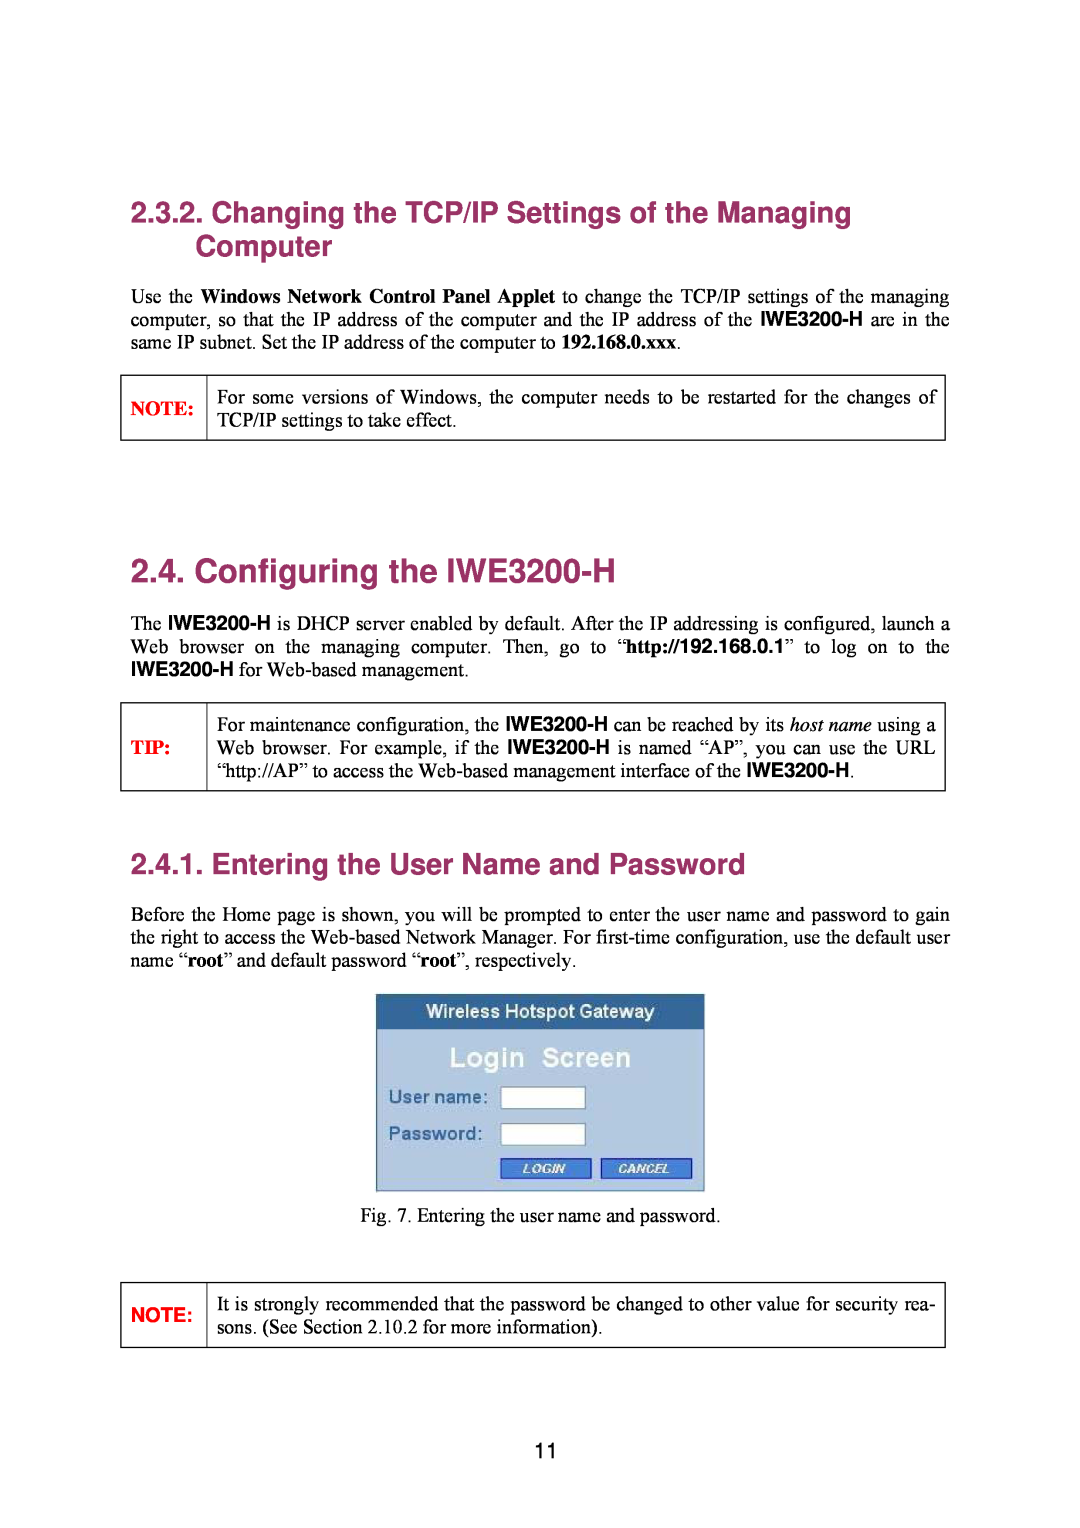 Epson manual Configuring the IWE3200-H, Entering the User Name and Password 